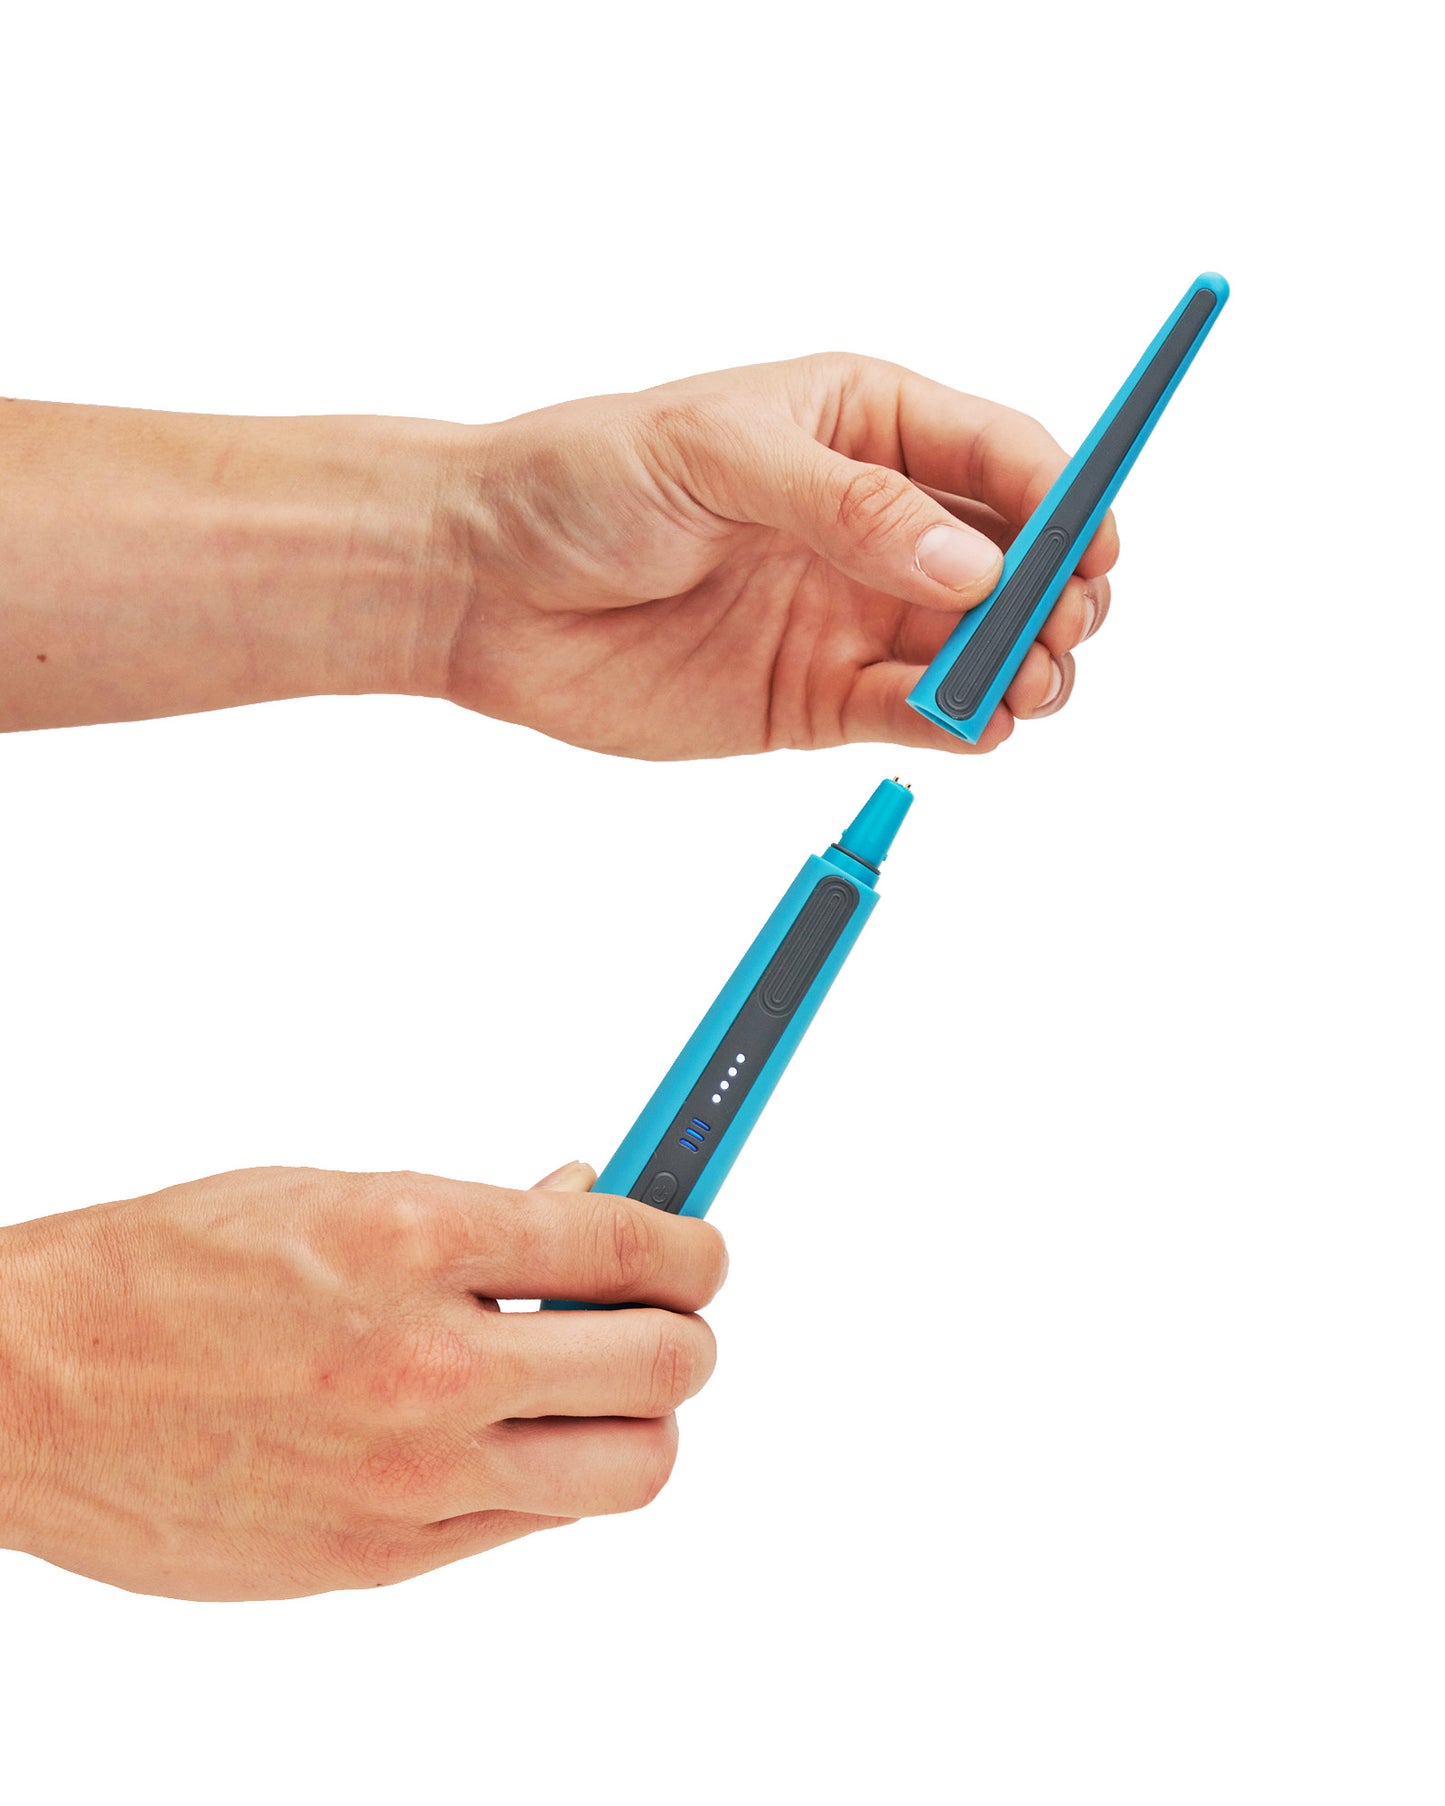 A replacement brush head for the Oreze toothbrush in marine blue, demonstrated by a model's hands